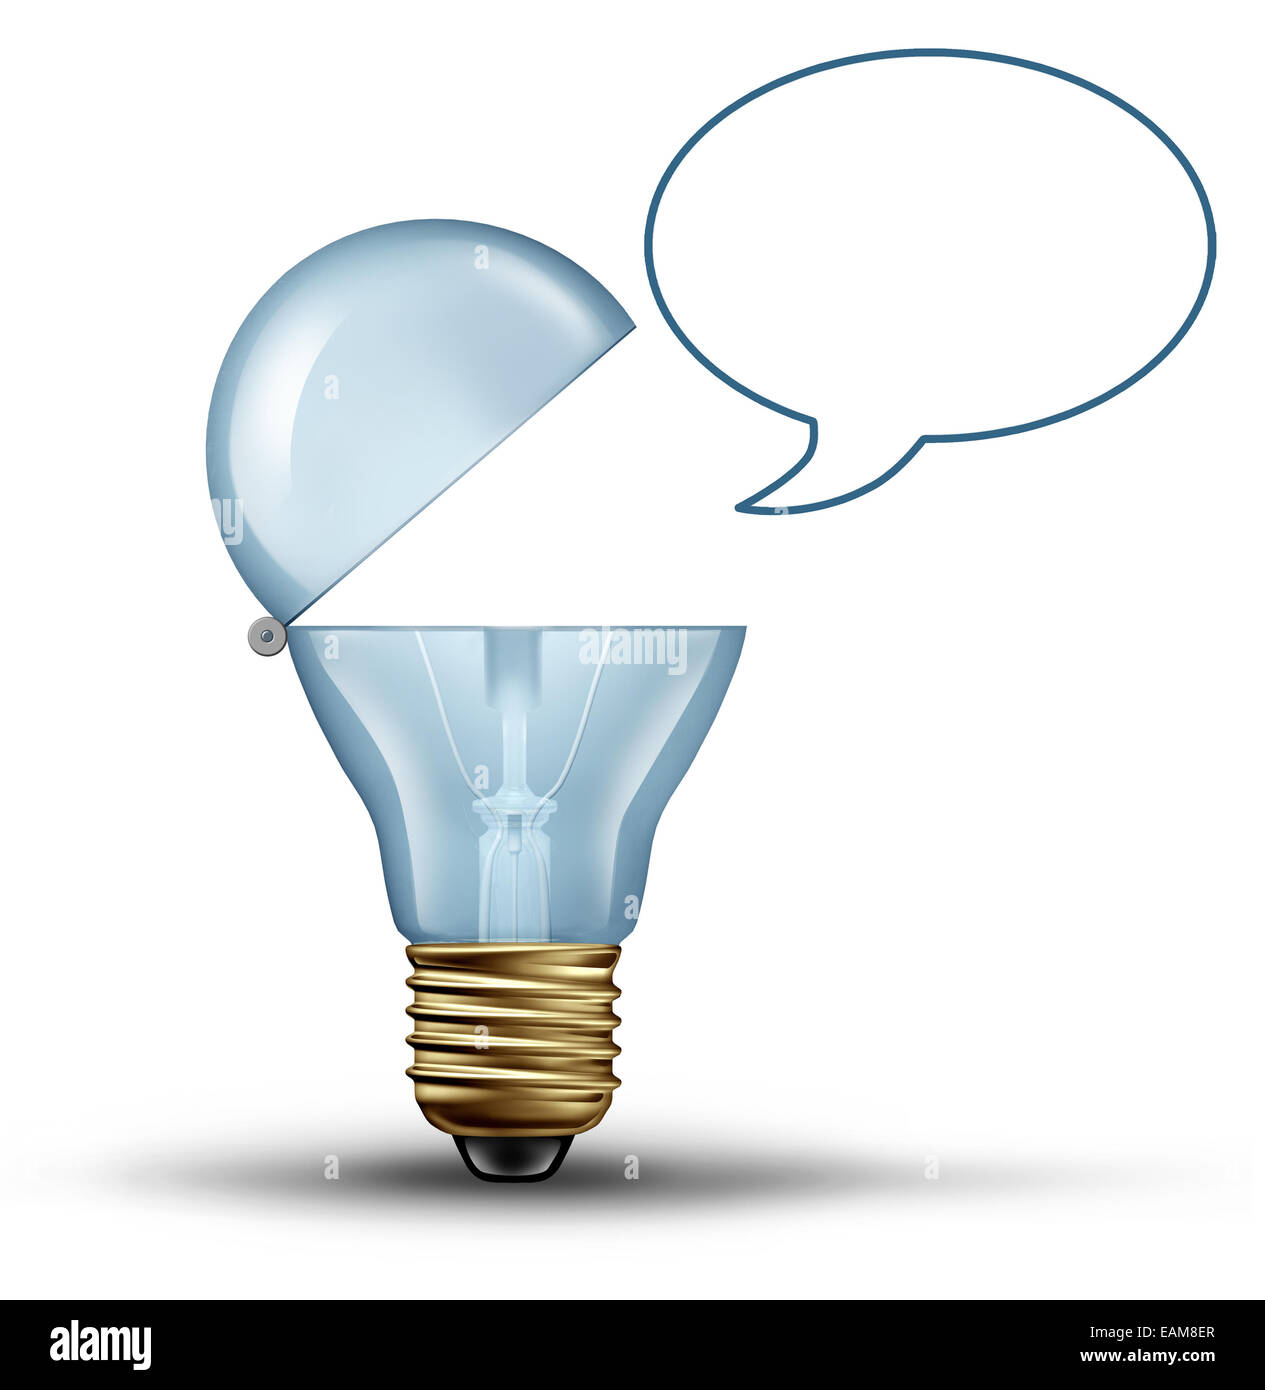 Idea communication concept as a lightbulb with an open mouth talking wth a  blank speech bubble as a creative symbol for communicating innovative  thinking through the use of marketing and social media